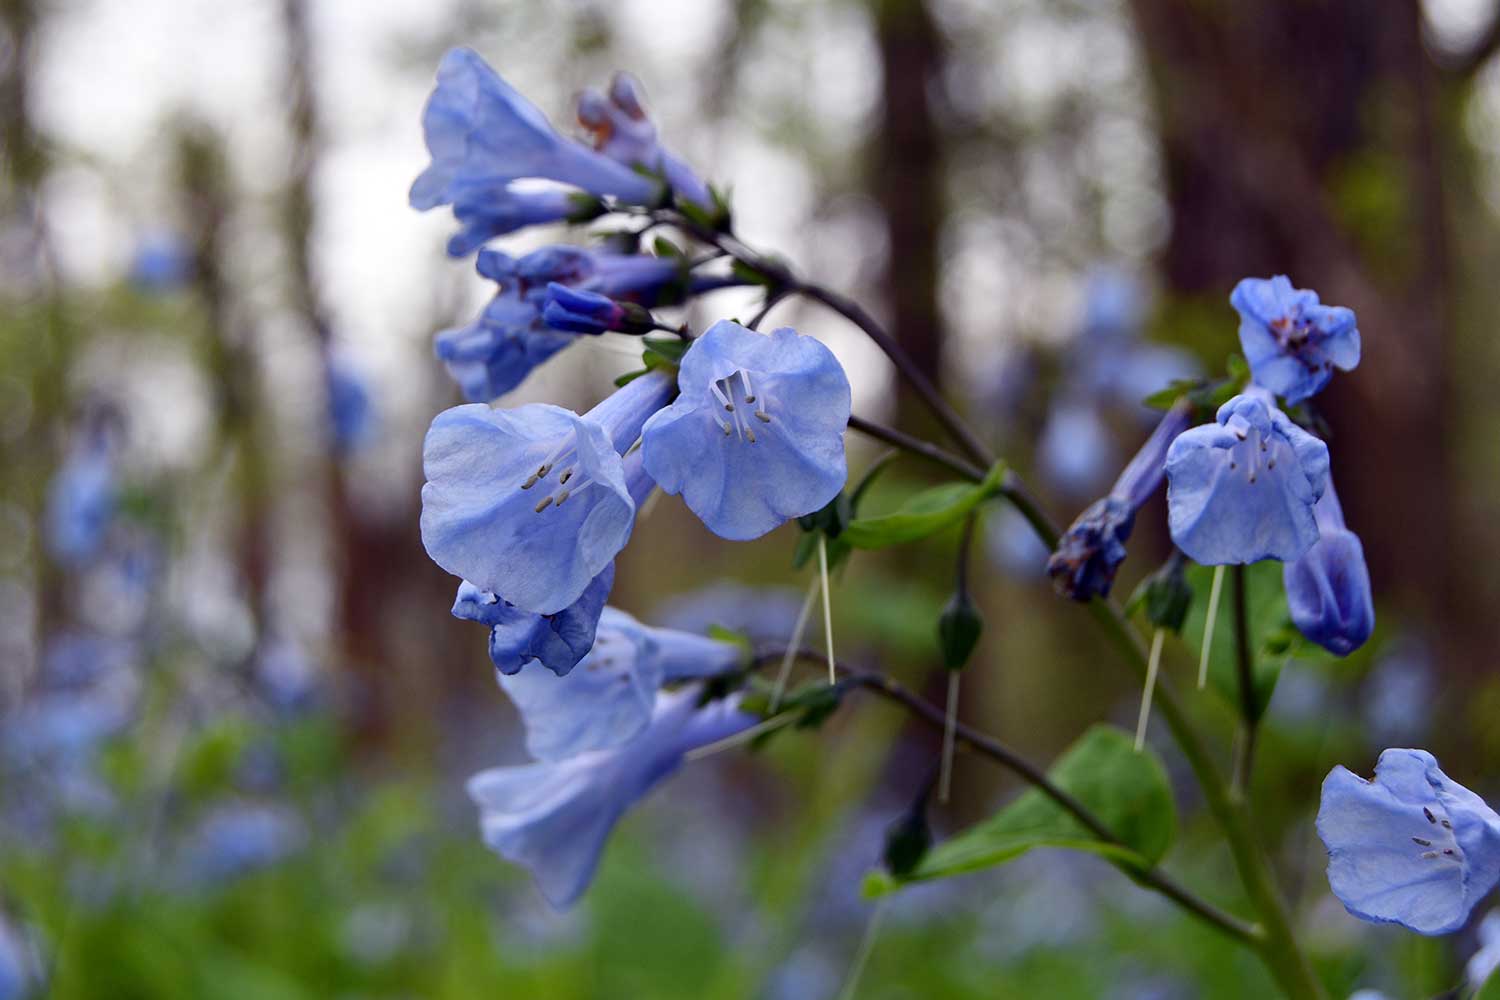 A closeup of bluebell blossoms.